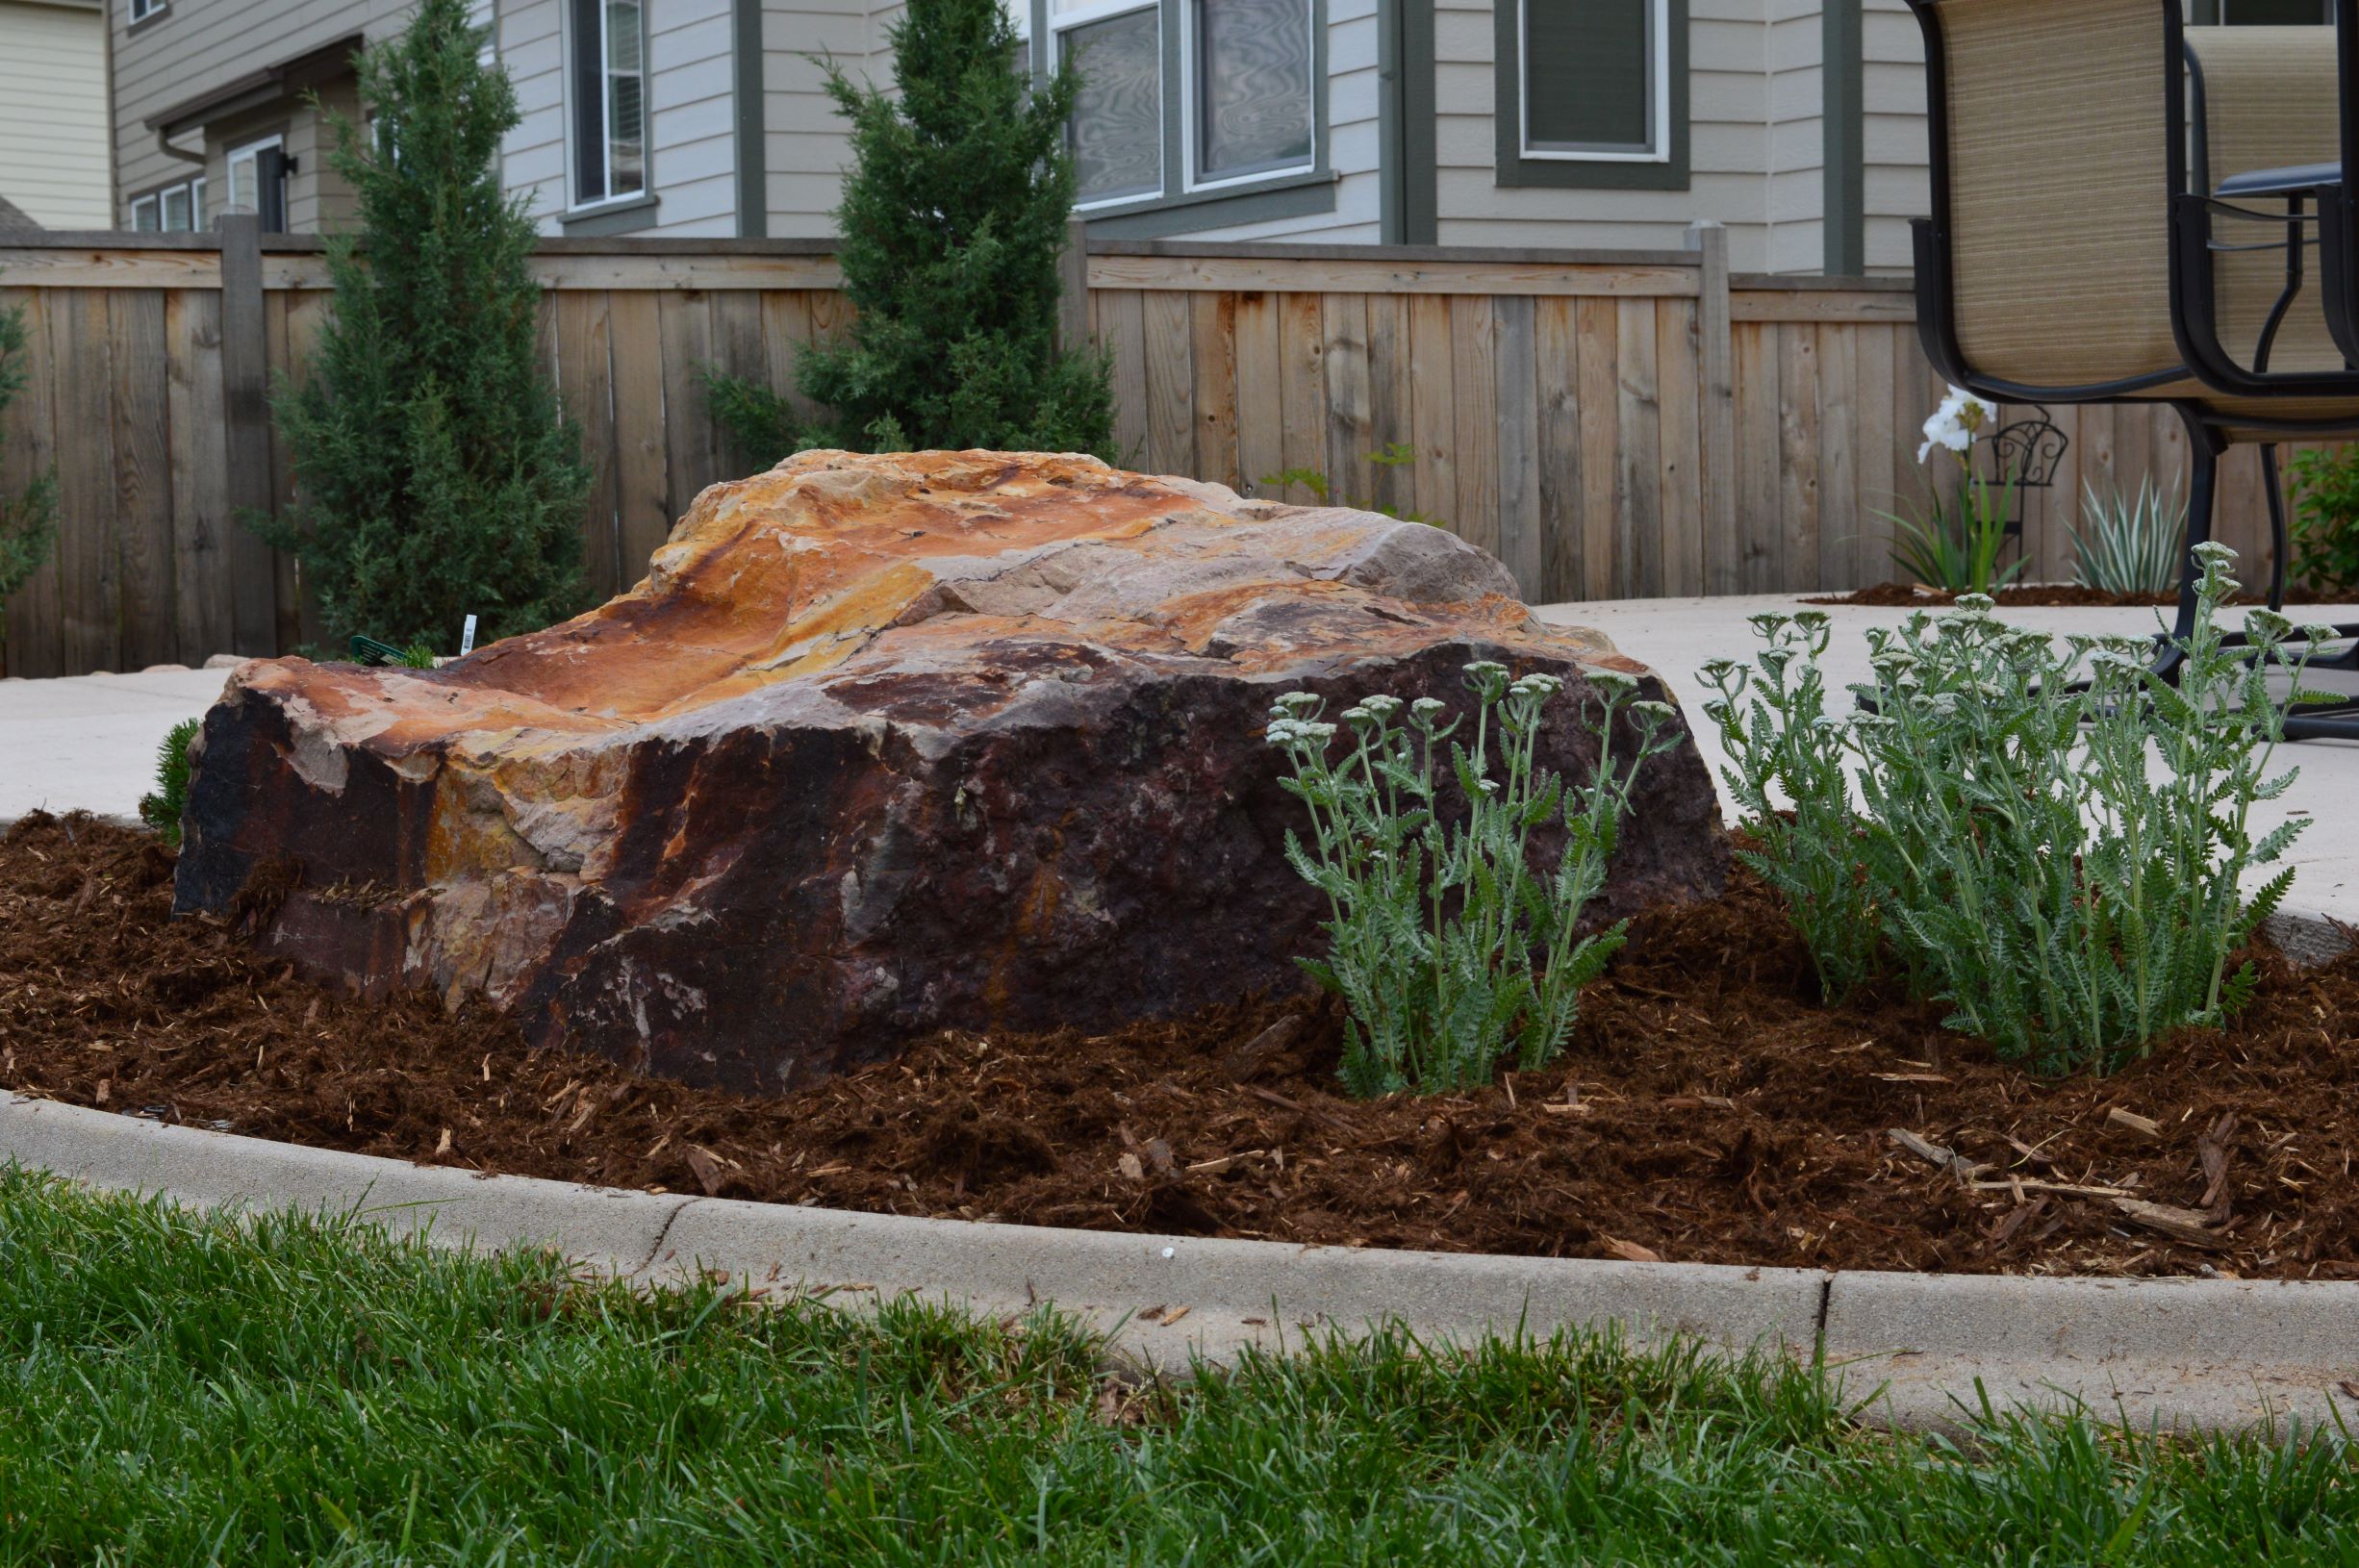 Large decorative rock with bushes and mulch around it.